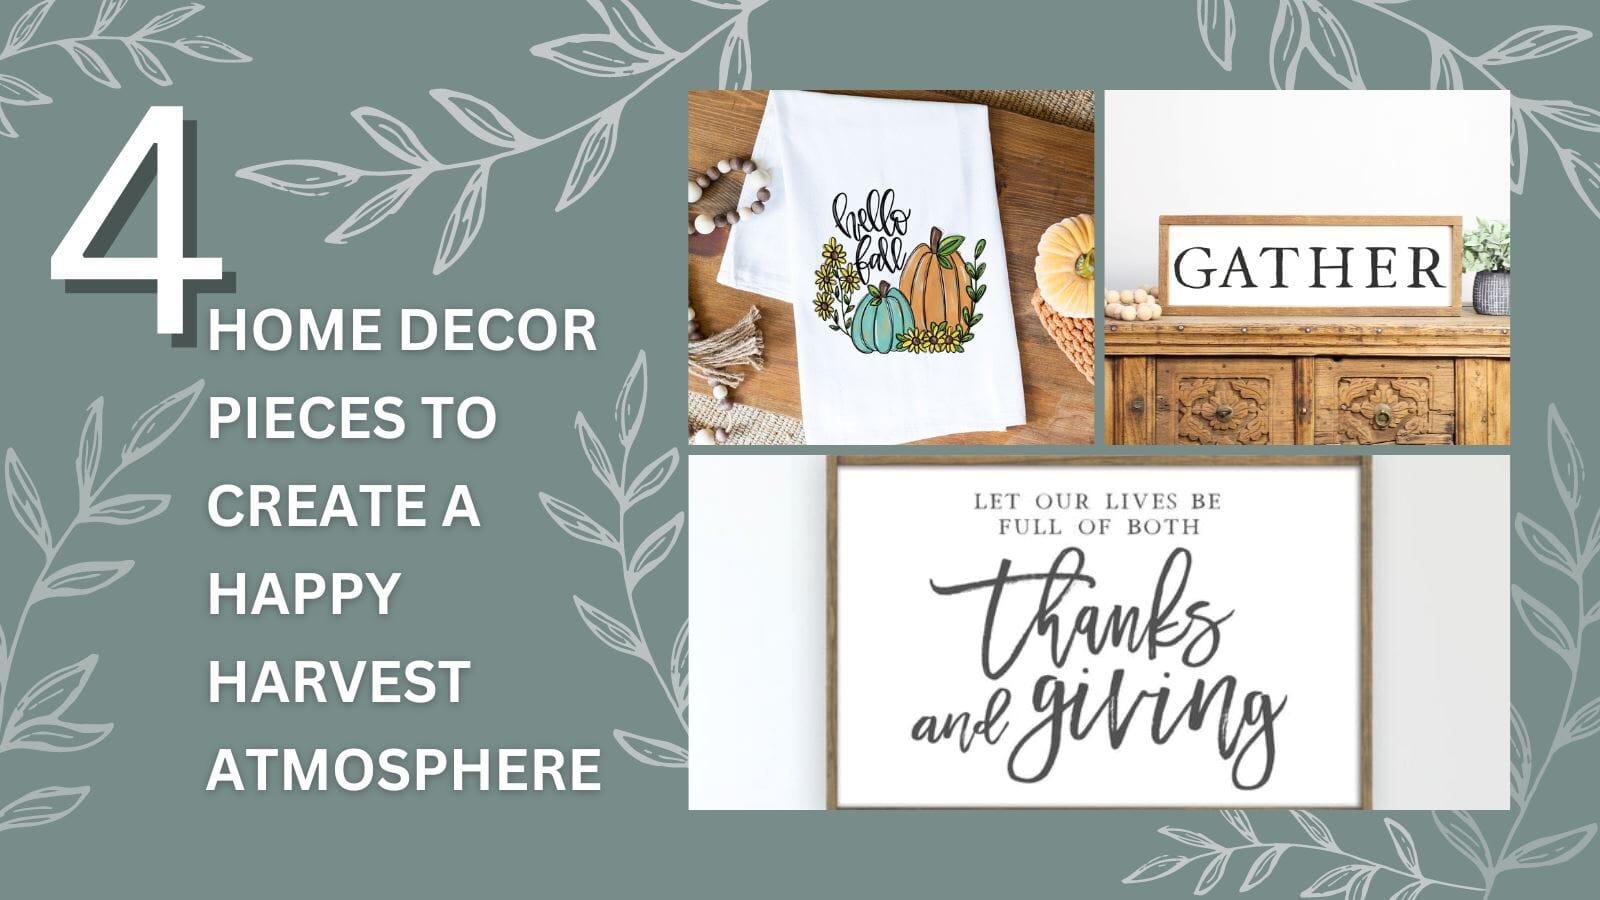 4 Home Decor Pieces To Create a Happy Harvest Atmosphere